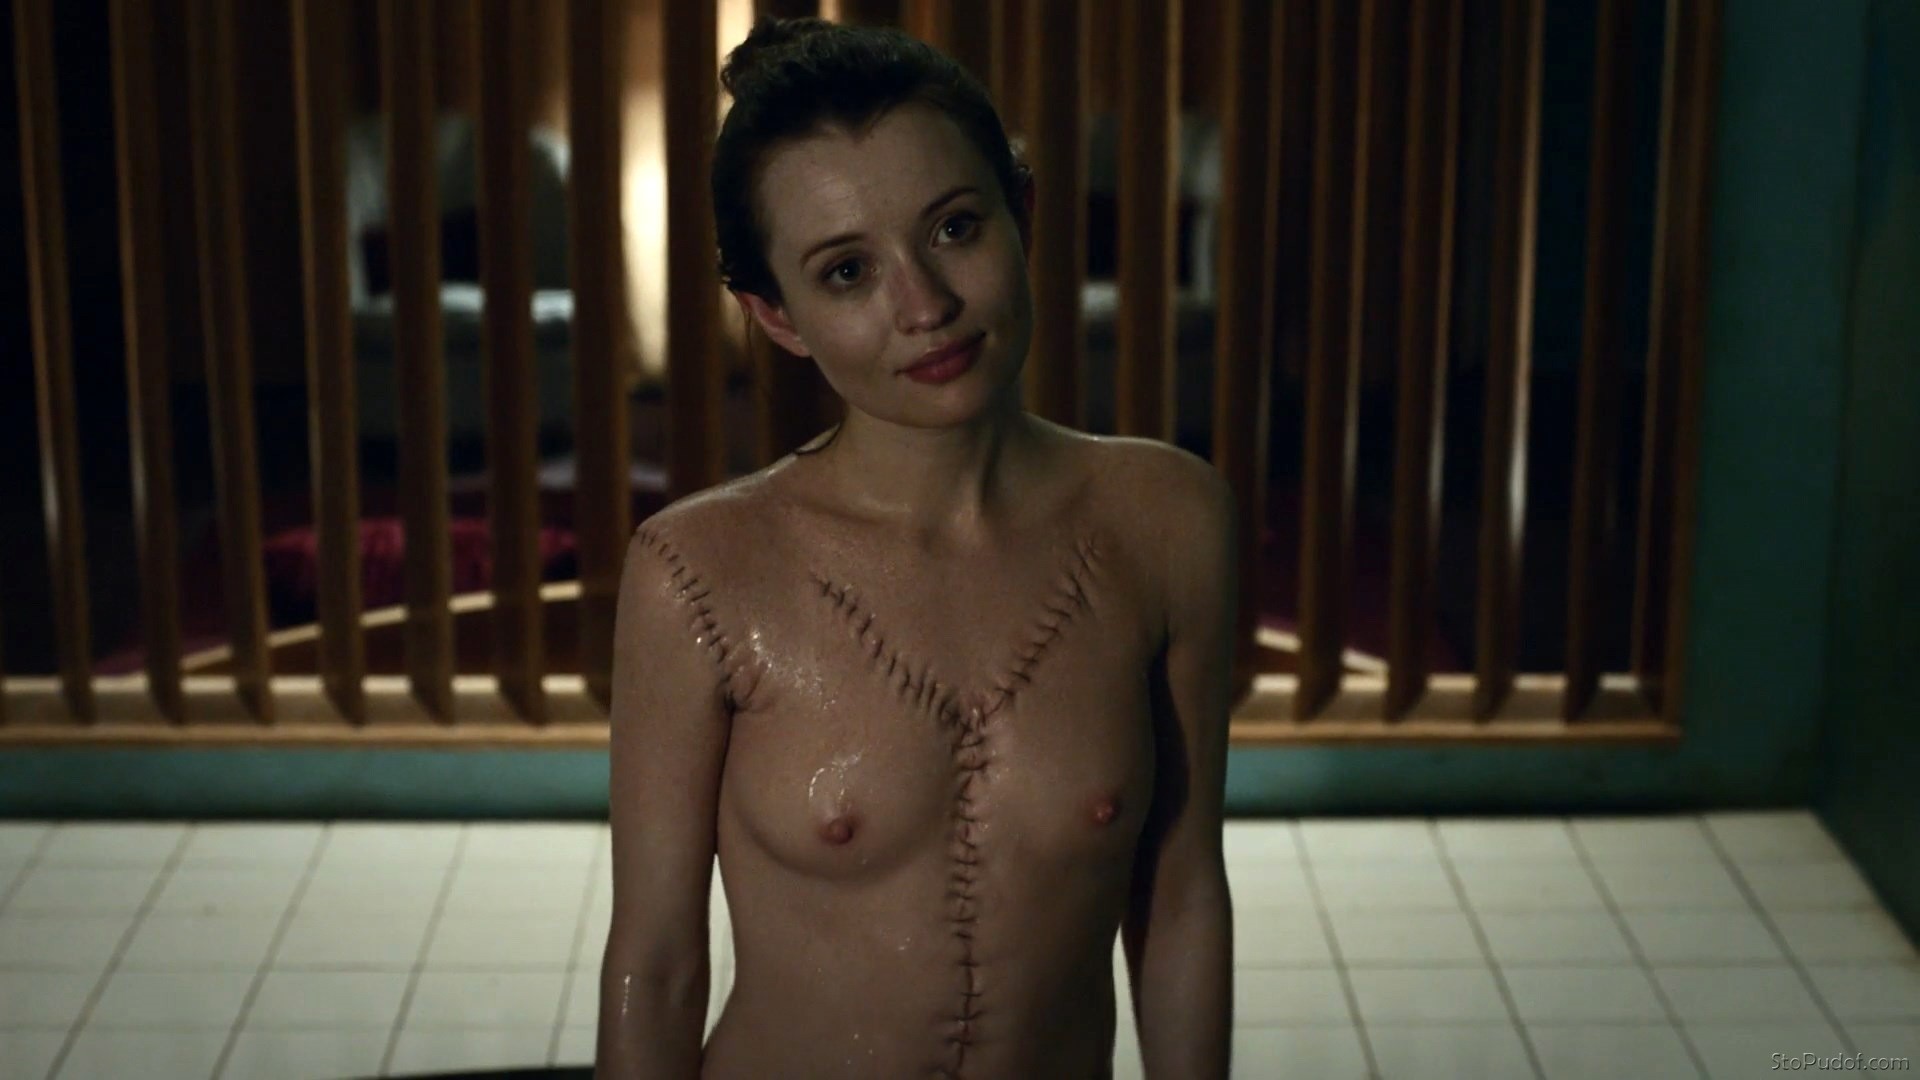 naked pictures of Emily Browning - UkPhotoSafari